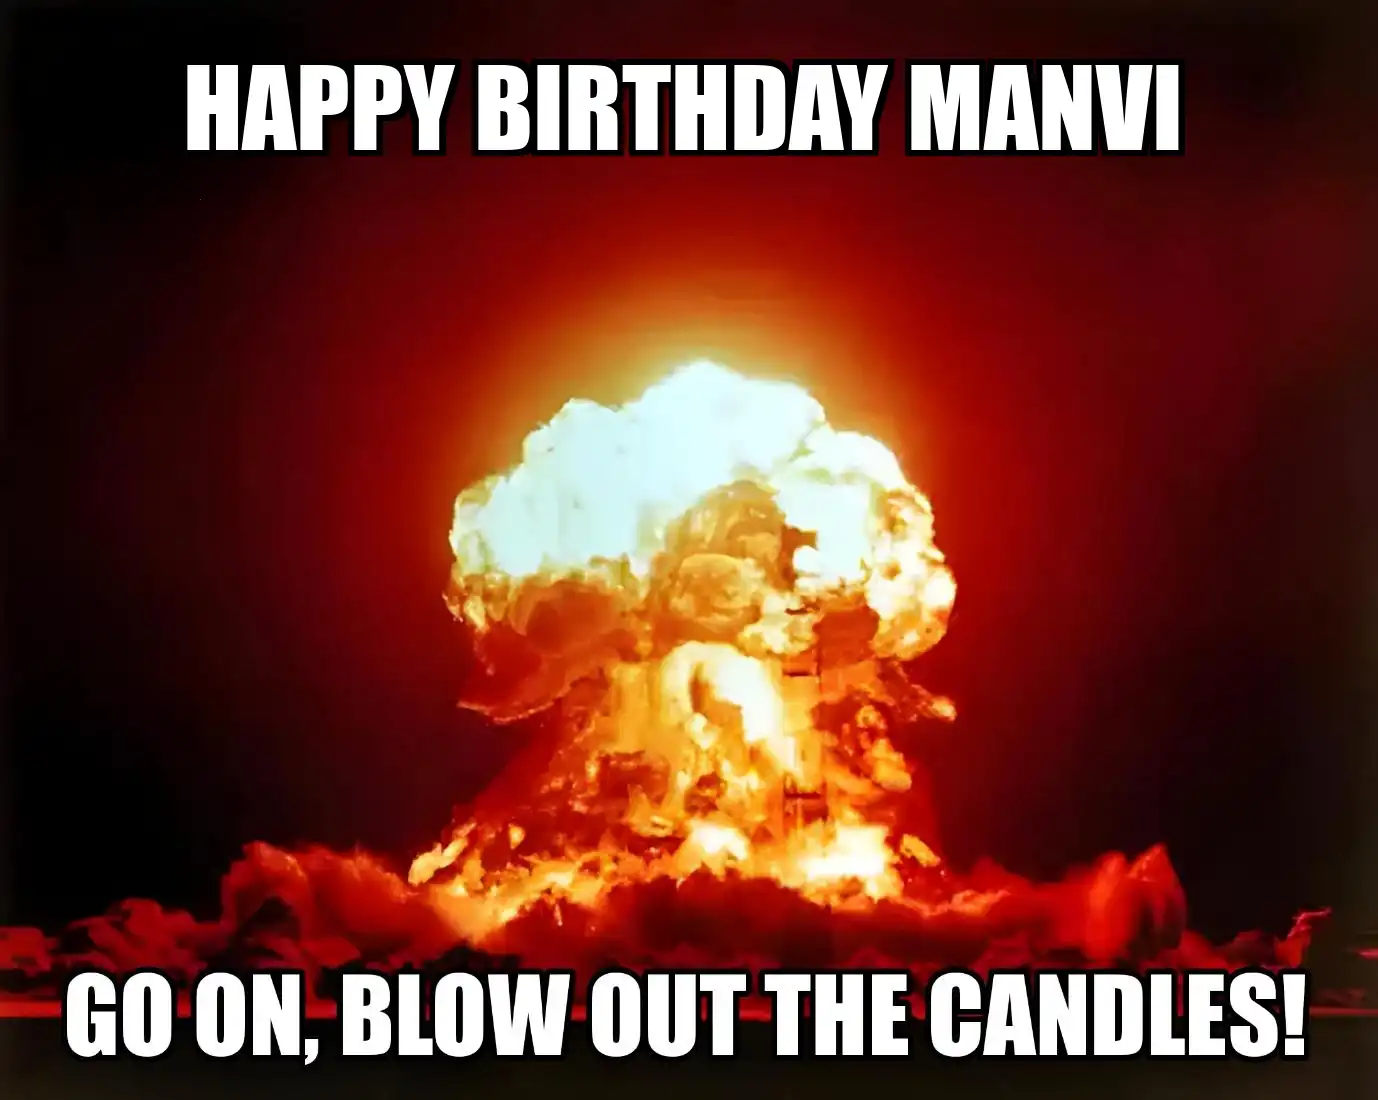 Happy Birthday Manvi Go On Blow Out The Candles Meme